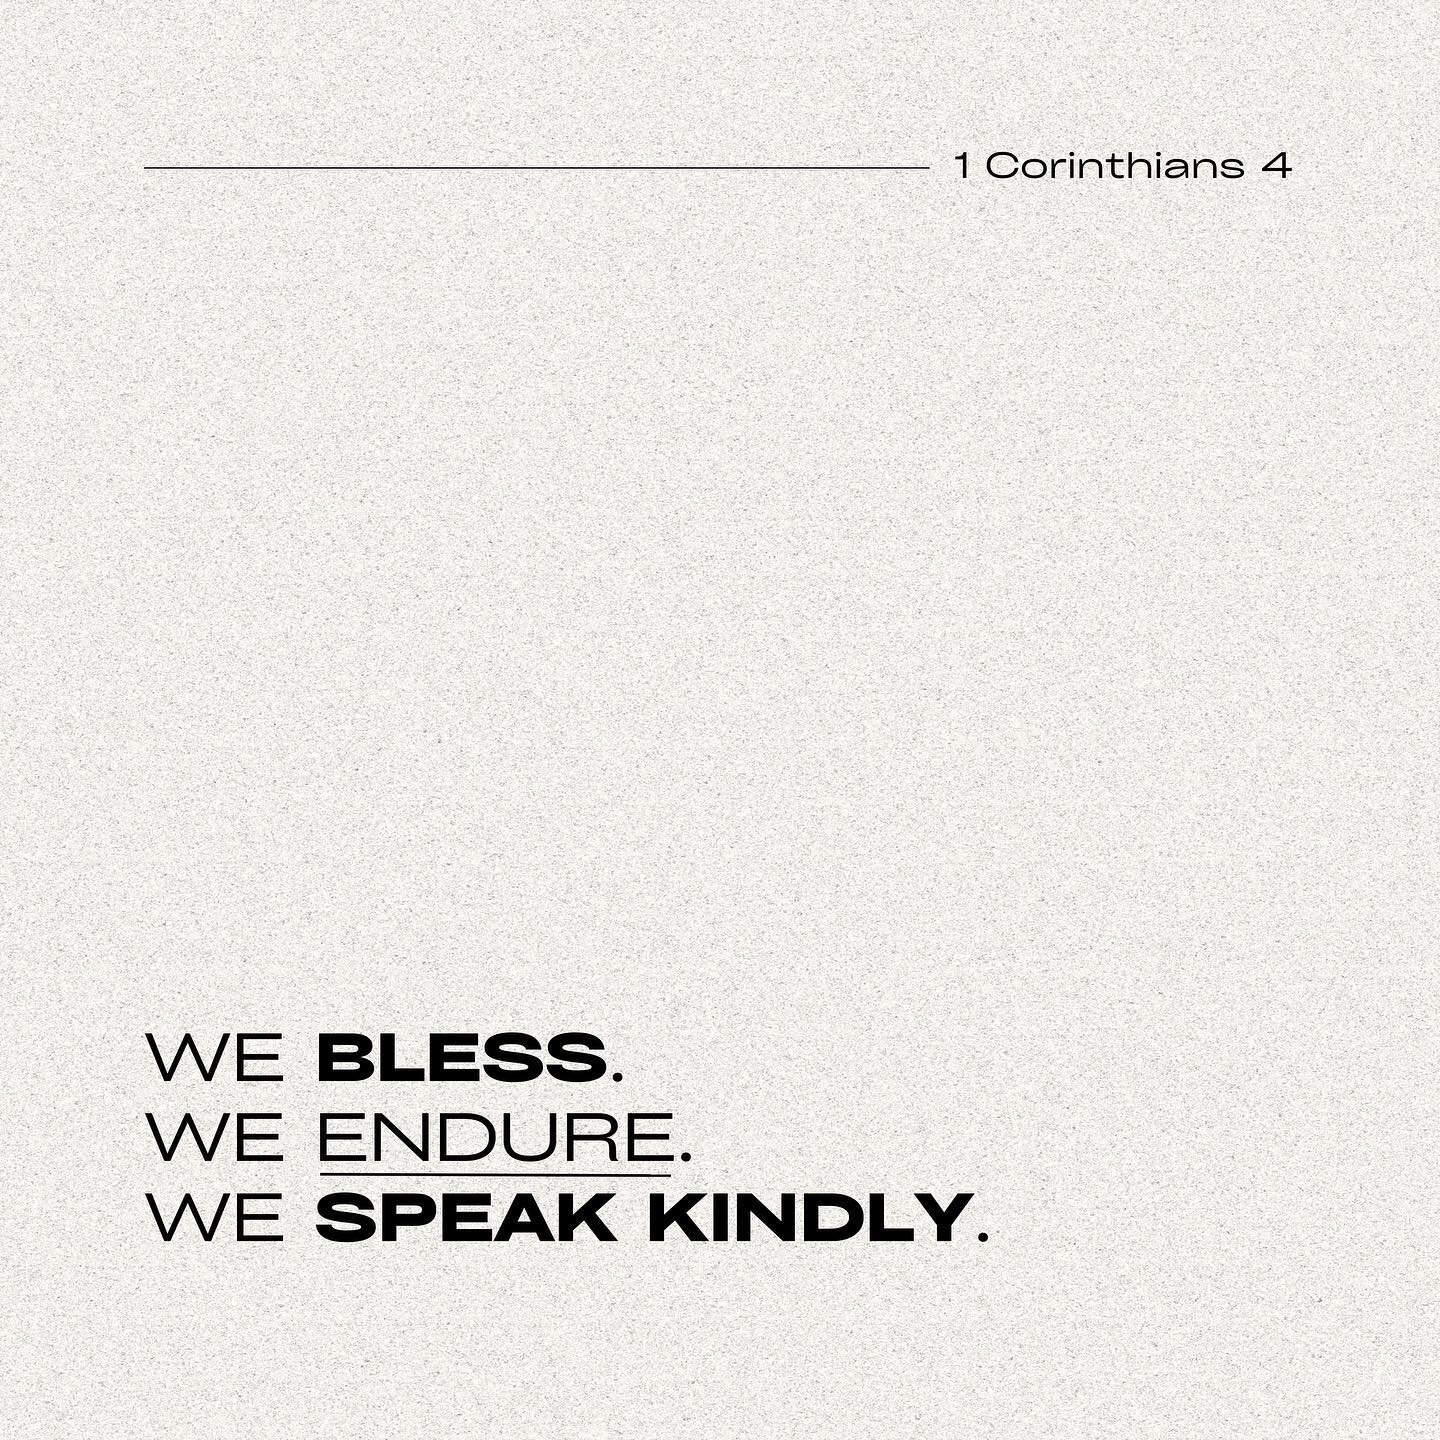 &ldquo;When we HINGE OURSELVES ON HUMILITY, we respond different!&rdquo; @underhilldaniel 

 * When we are reviled&hellip;WE BLESS.
 * When we are persecuted&hellip;WE ENDURE.
 * When we are slandered&hellip;WE SPEAK KINDLY.
-1 Corinthians 4

From Su